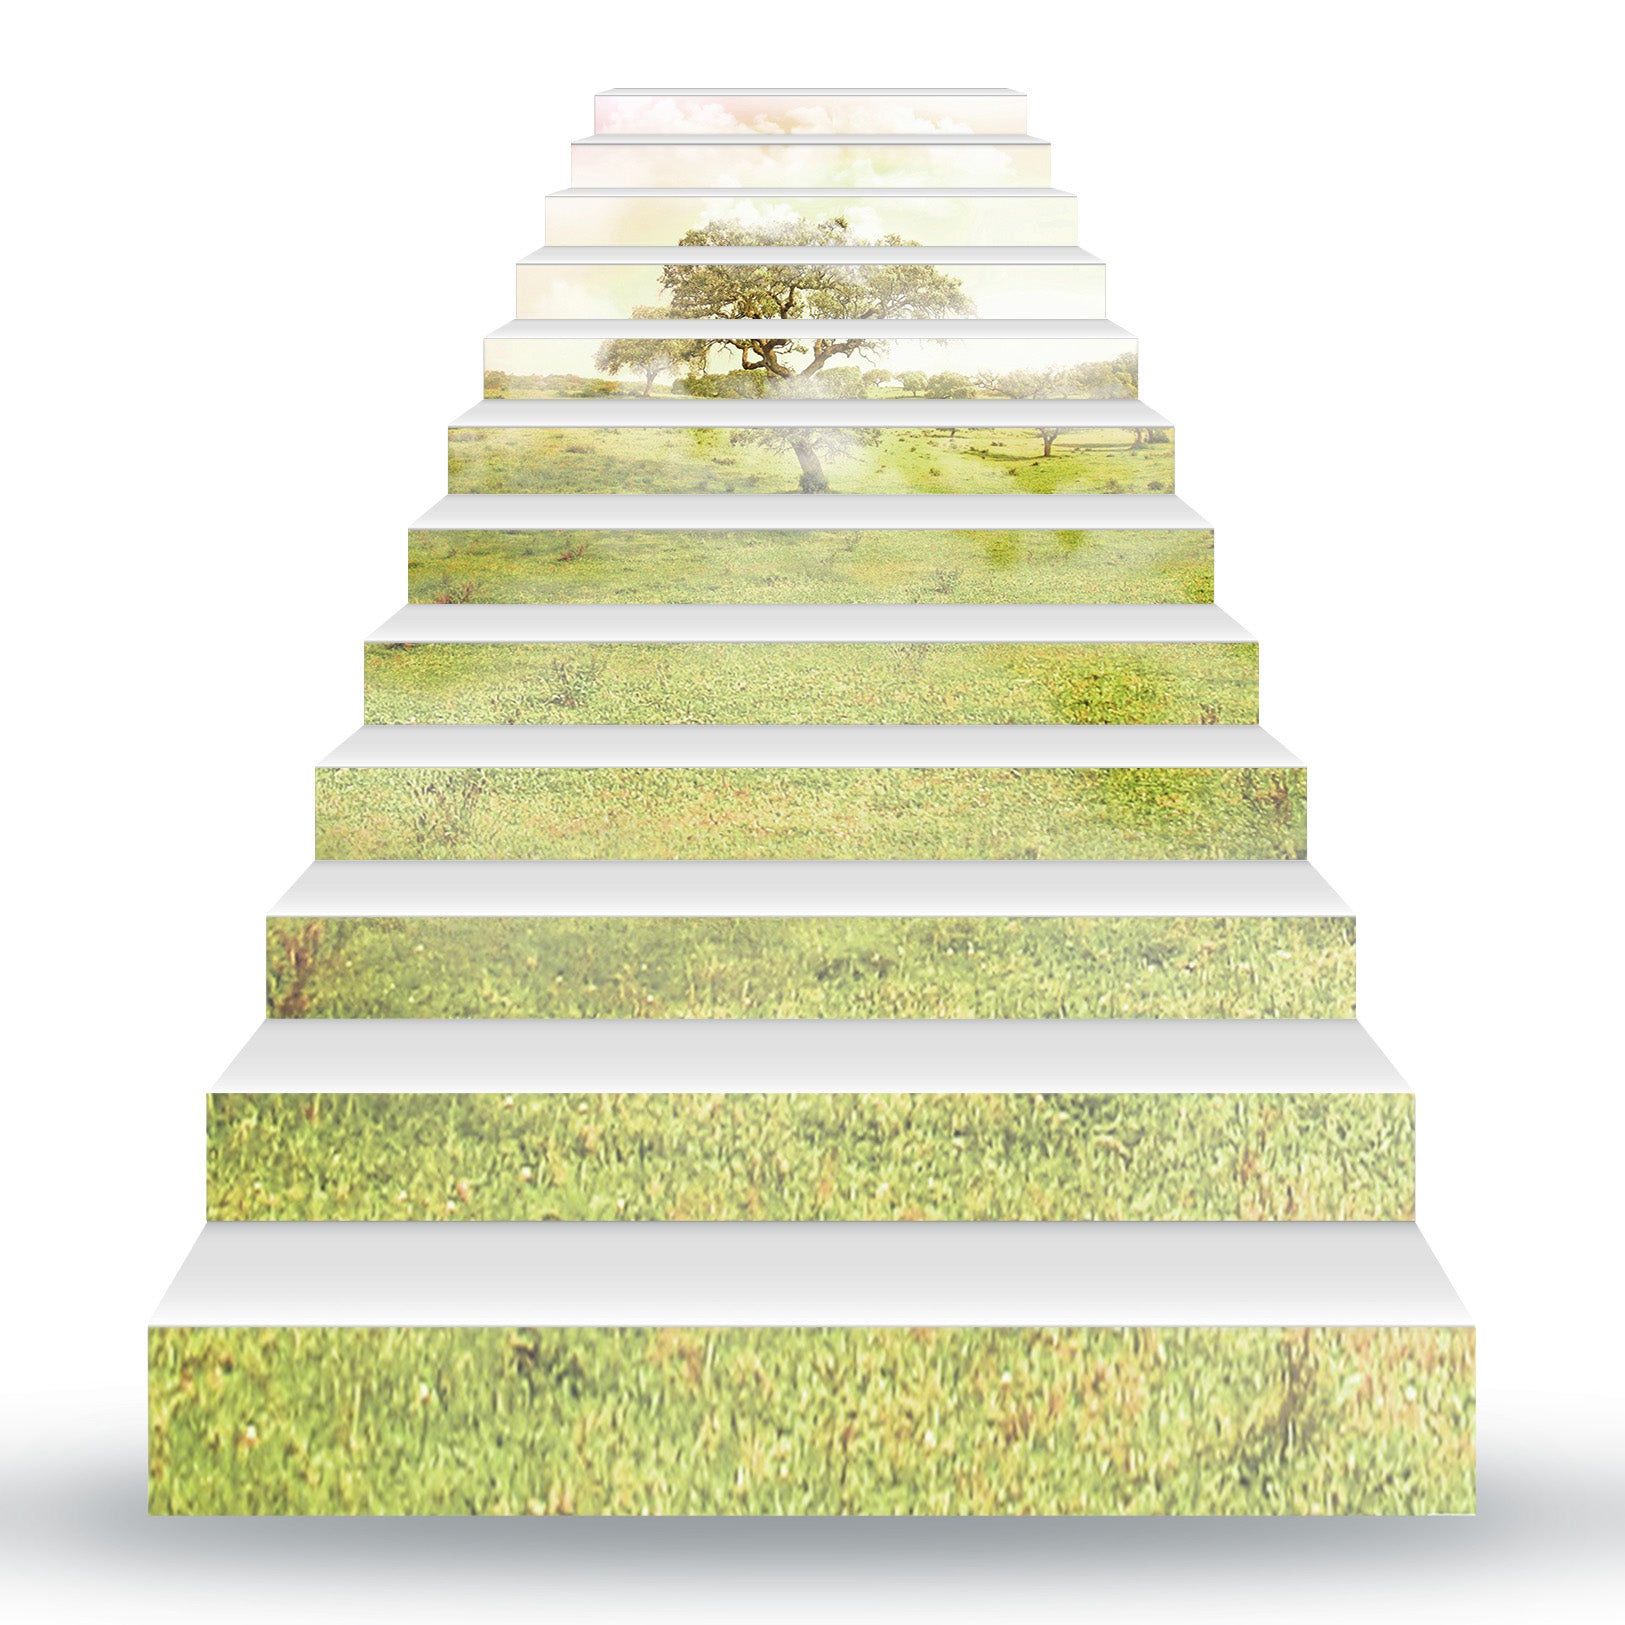 3D Green Misty Tree 136 Stair Risers